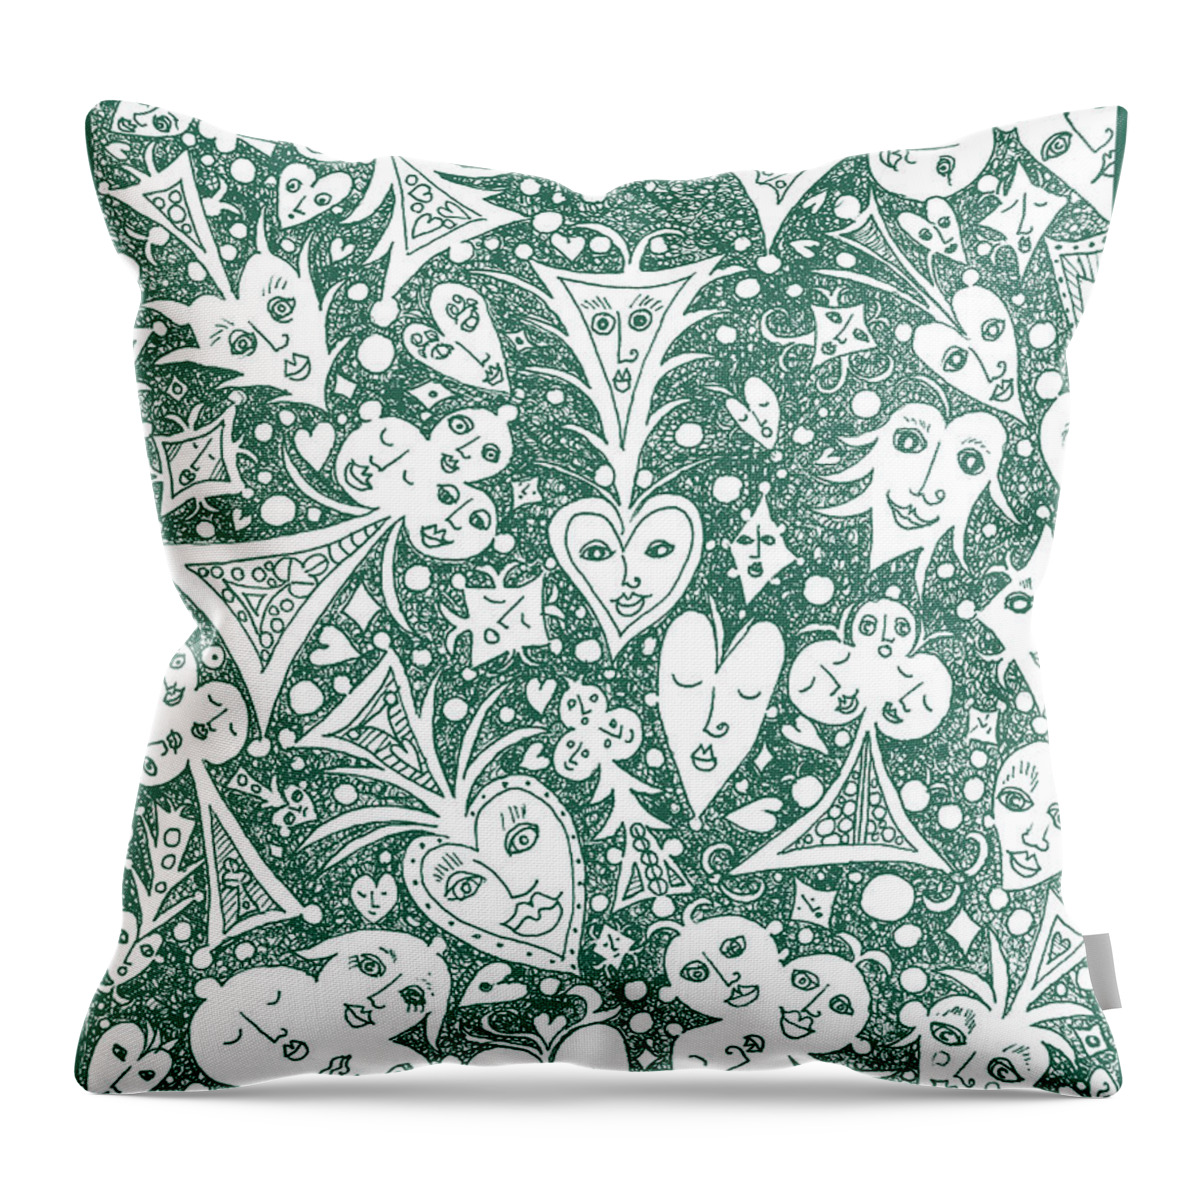 Lise Winne Throw Pillow featuring the drawing Playing Card Symbols with Faces in Hunter Green by Lise Winne